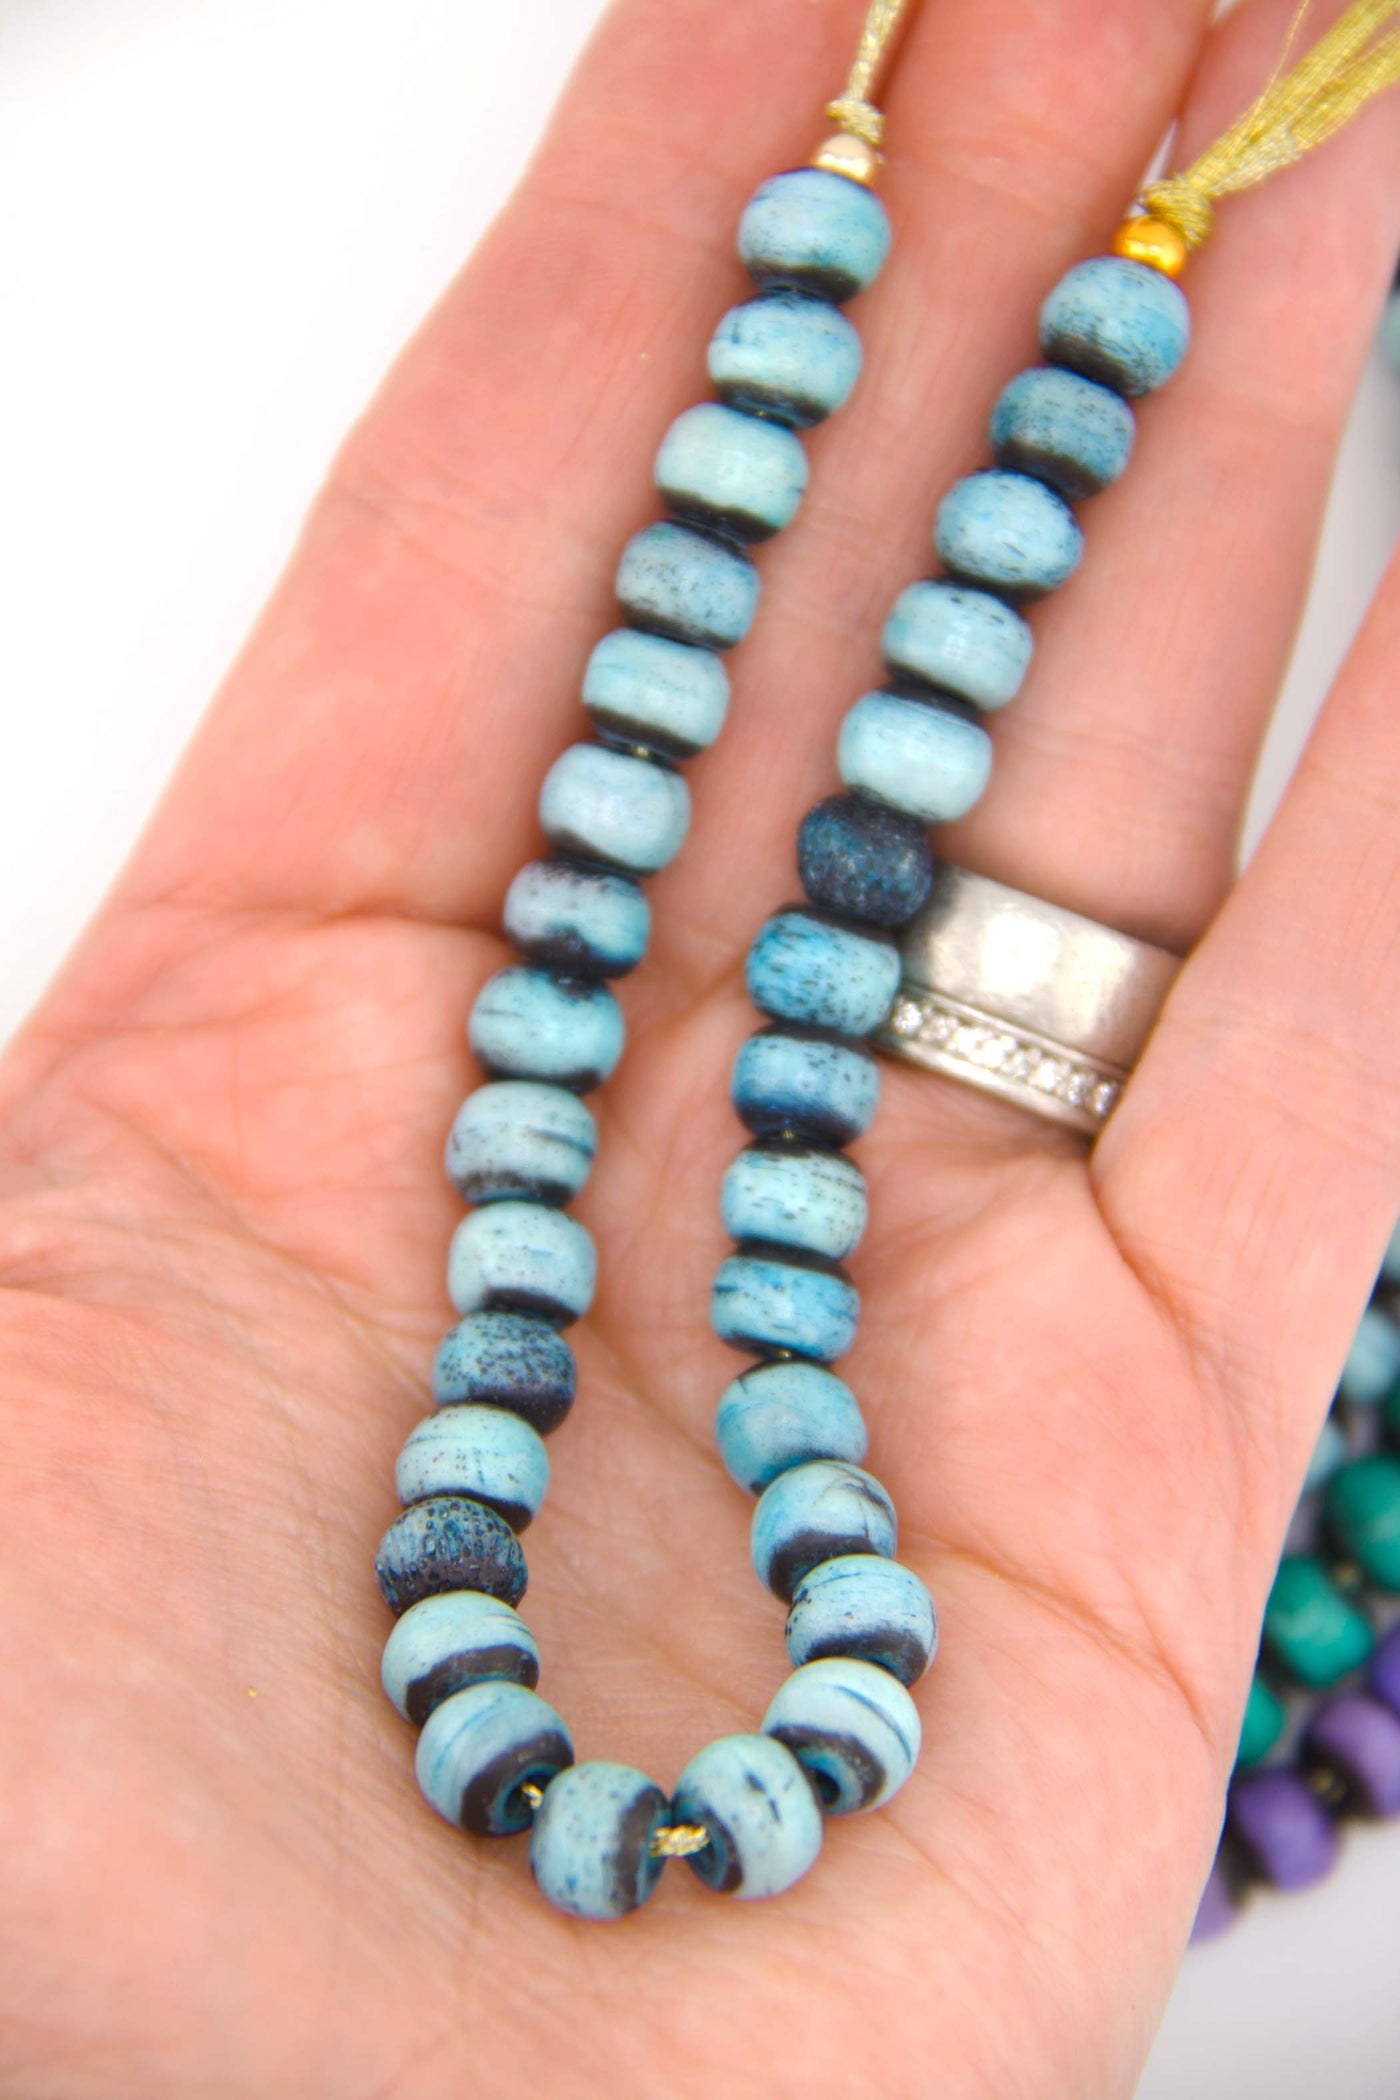 Aqua Beads for DIY jewelry inspired by the Northern Lights.